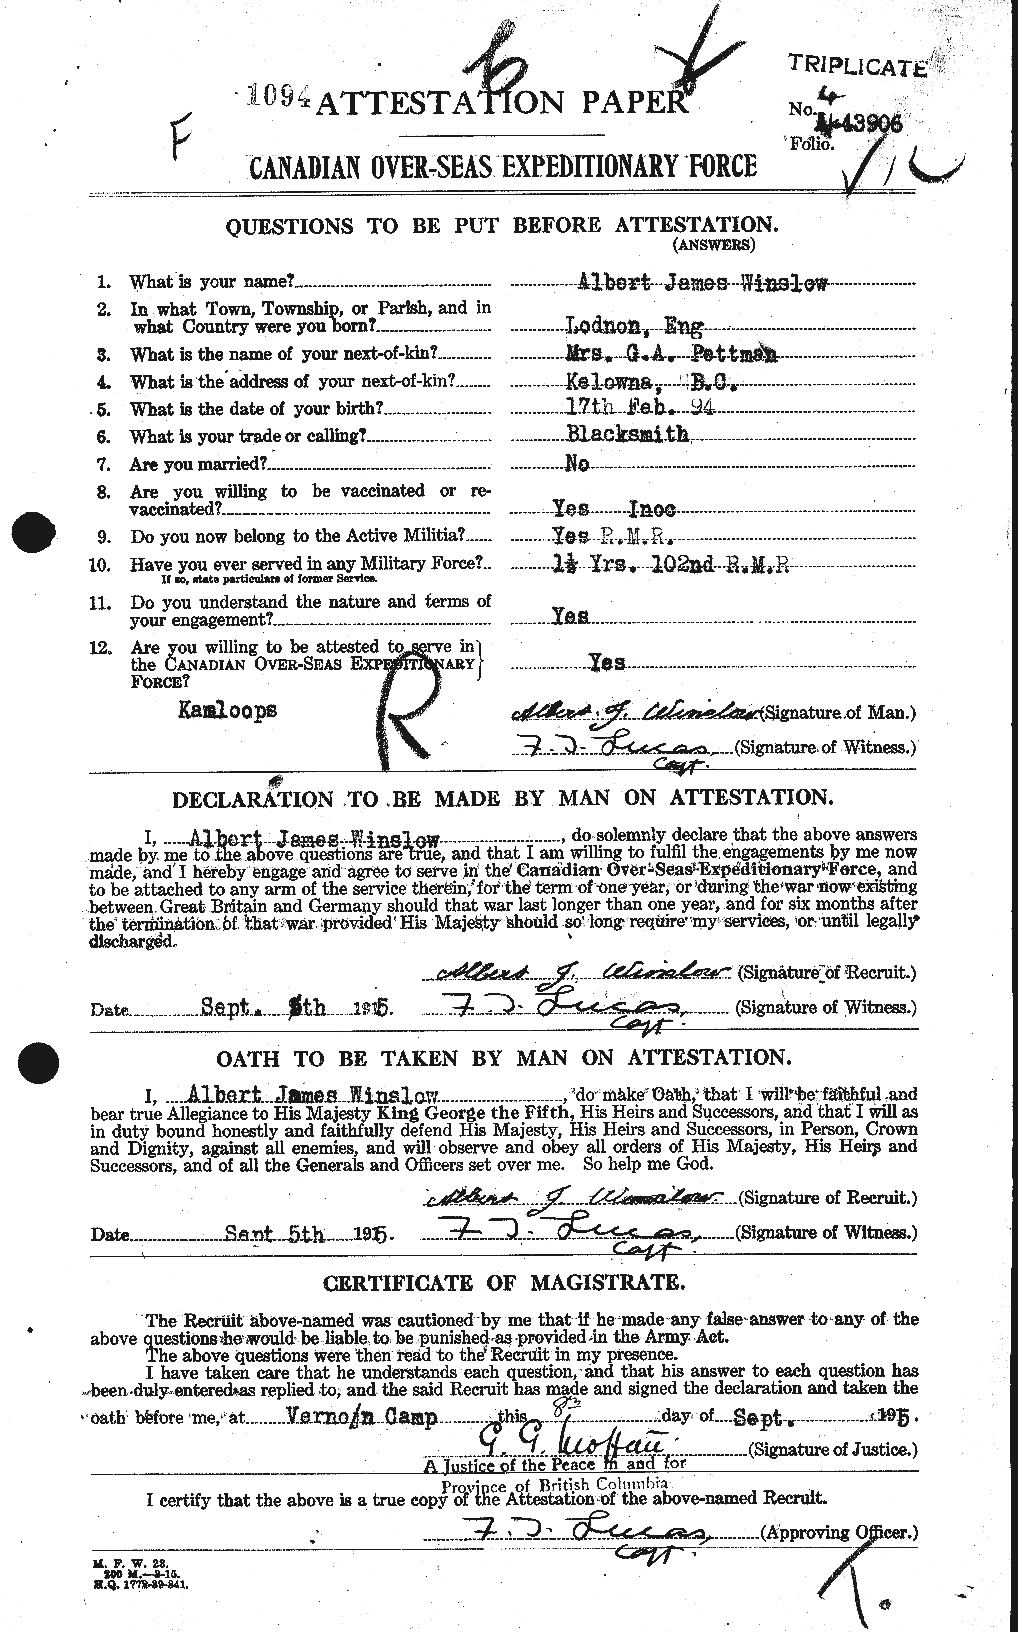 Personnel Records of the First World War - CEF 679187a